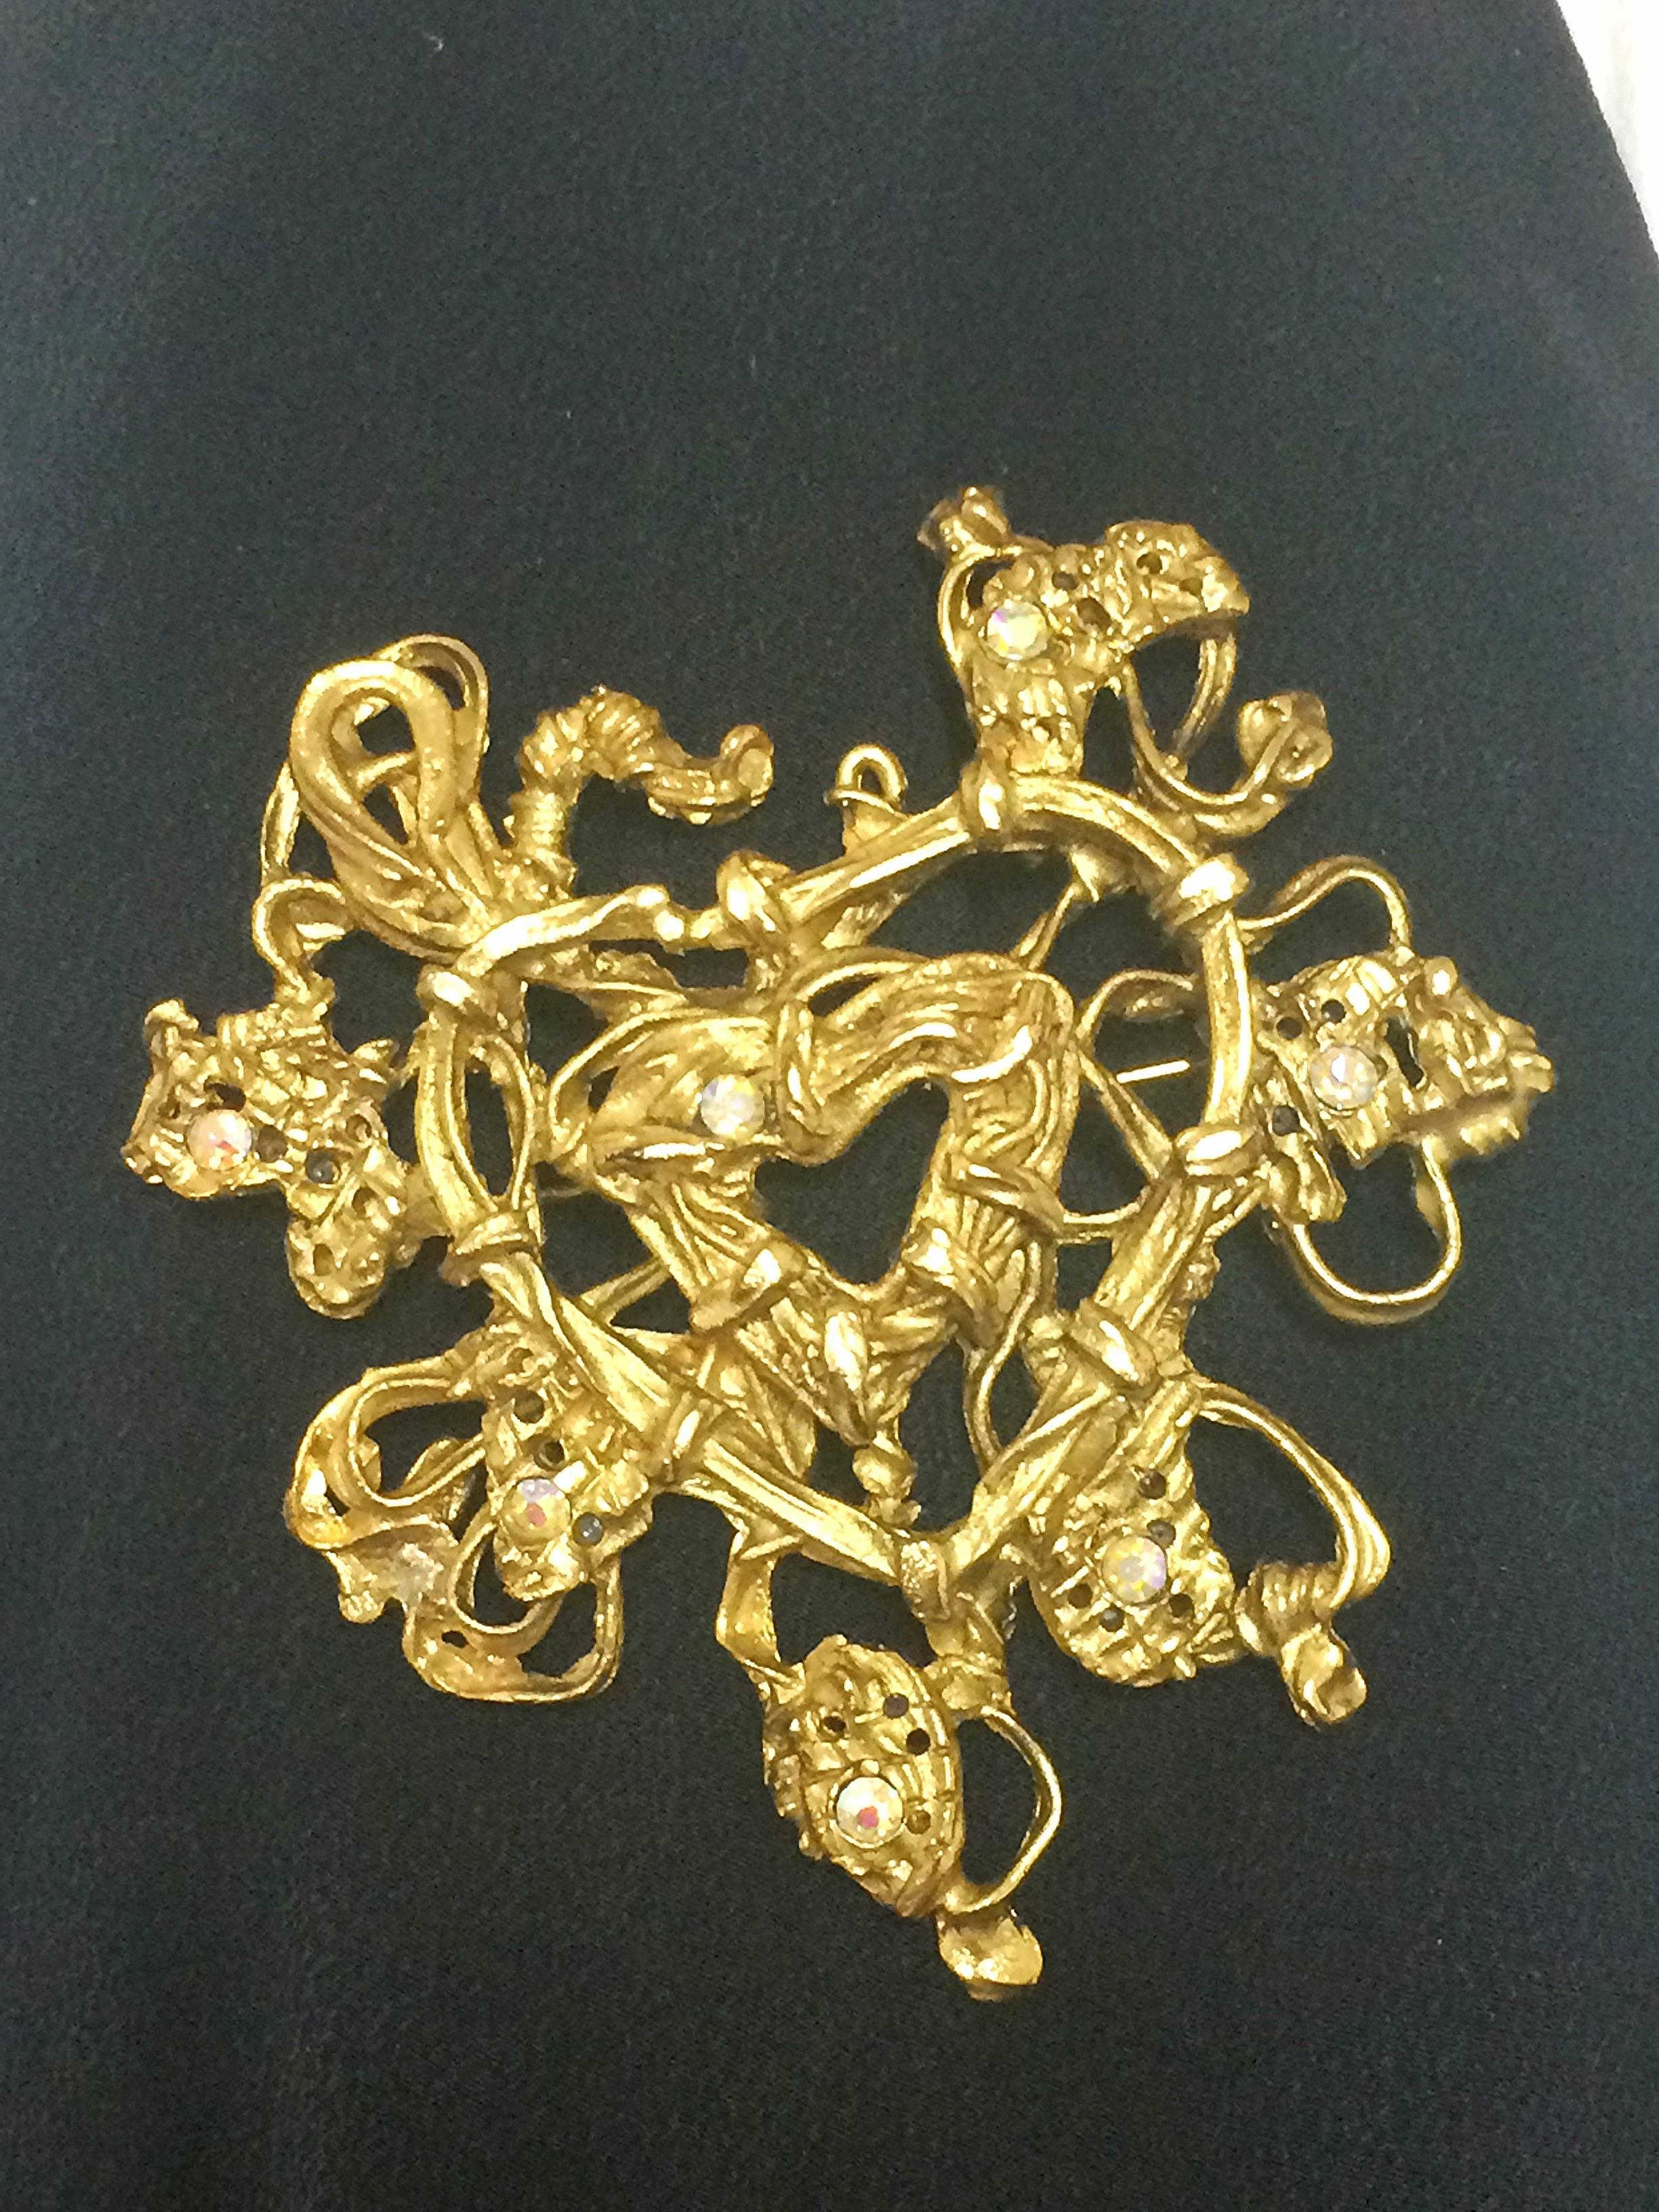 1990s. Vintage Christian Lacroix golden large edwardian heart and arabesque design brooch, hat pin, jacket pin with Swarovski stones. Perfect jewelry.
Great gift idea. Free gift wrapping. 

Can be used as a hat pin, scarf pin, and jacket pin as